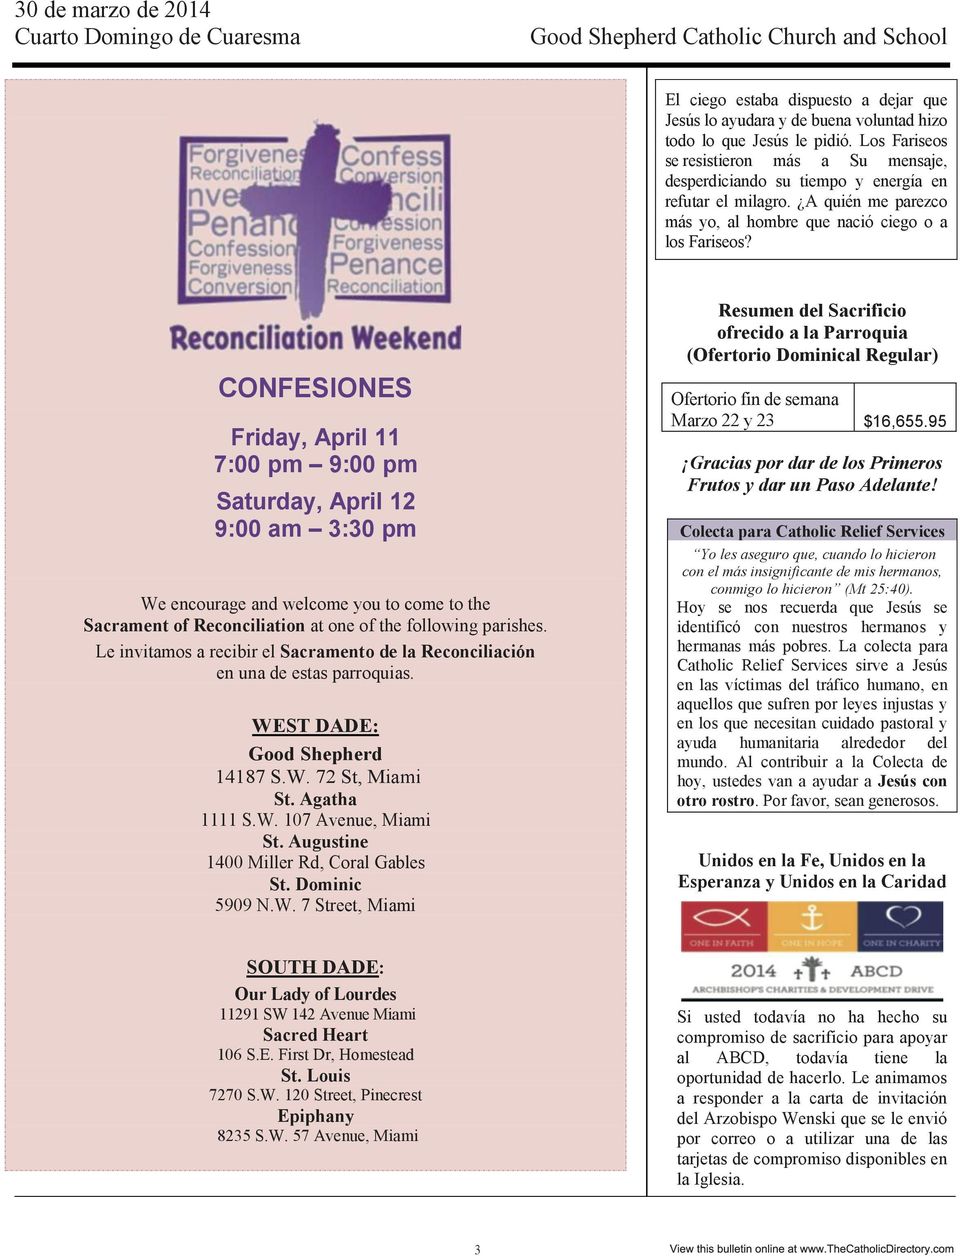 CONFESIONES Friday, April 11 7:00 pm 9:00 pm Saturday, April 12 9:00 am 3:30 pm We encourage and welcome you to come to the Sacrament of Reconciliation at one of the following parishes.